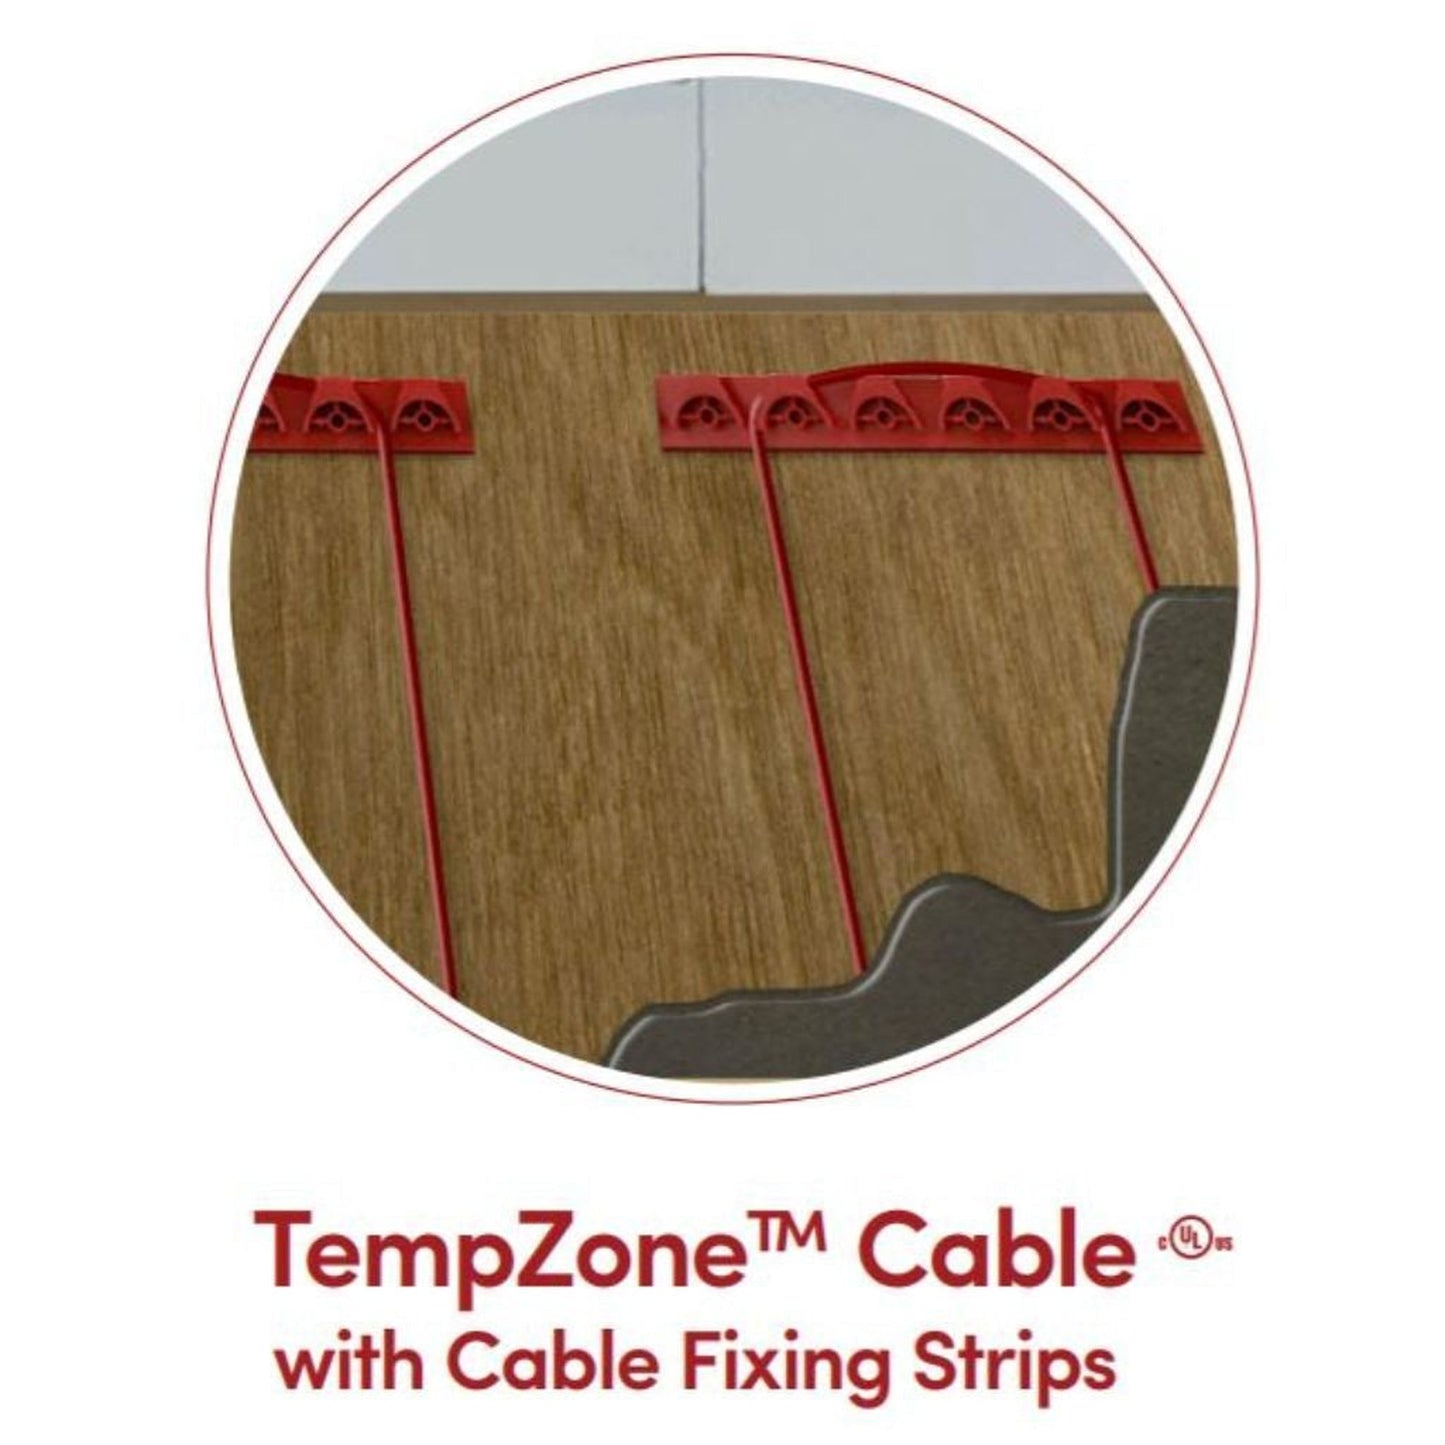 WarmlyYours TempZone Cable 50′ 120V Radiant Floor Heating Cable System Kit With nSpire Touch Programmable Touchscreen Thermostat